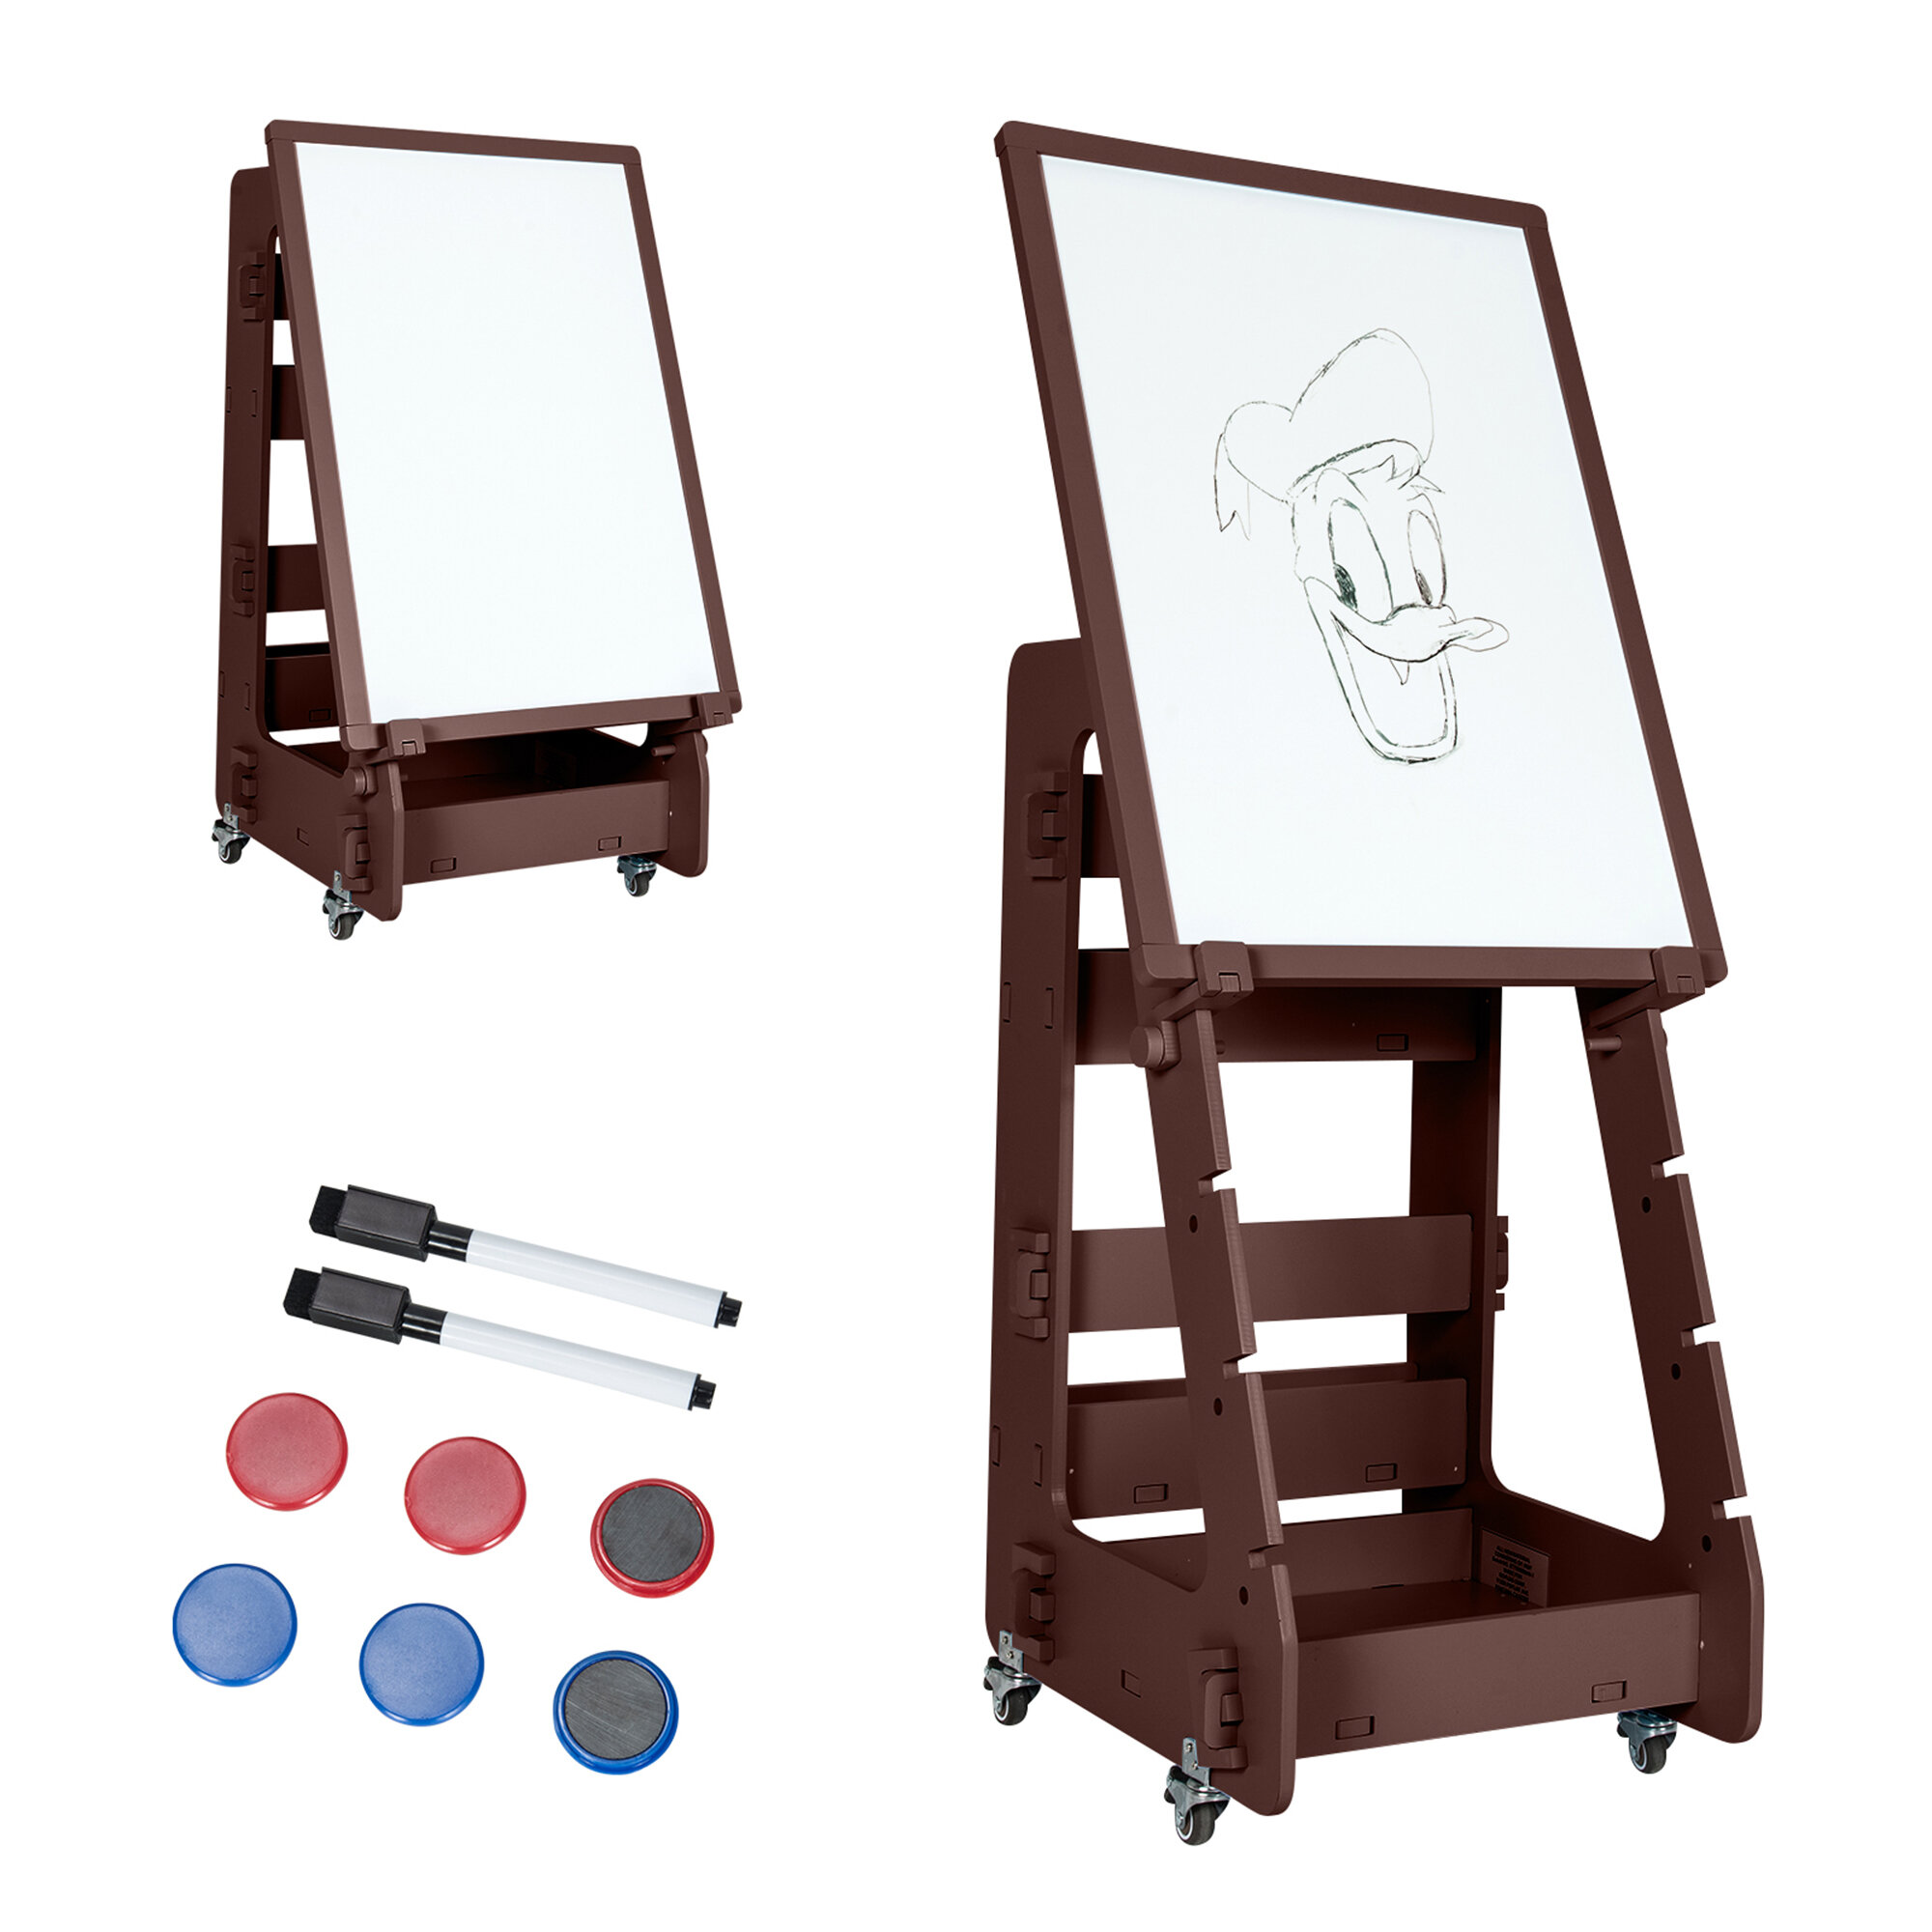 Professional Artist Wooden Material Display Artist Easel Painting